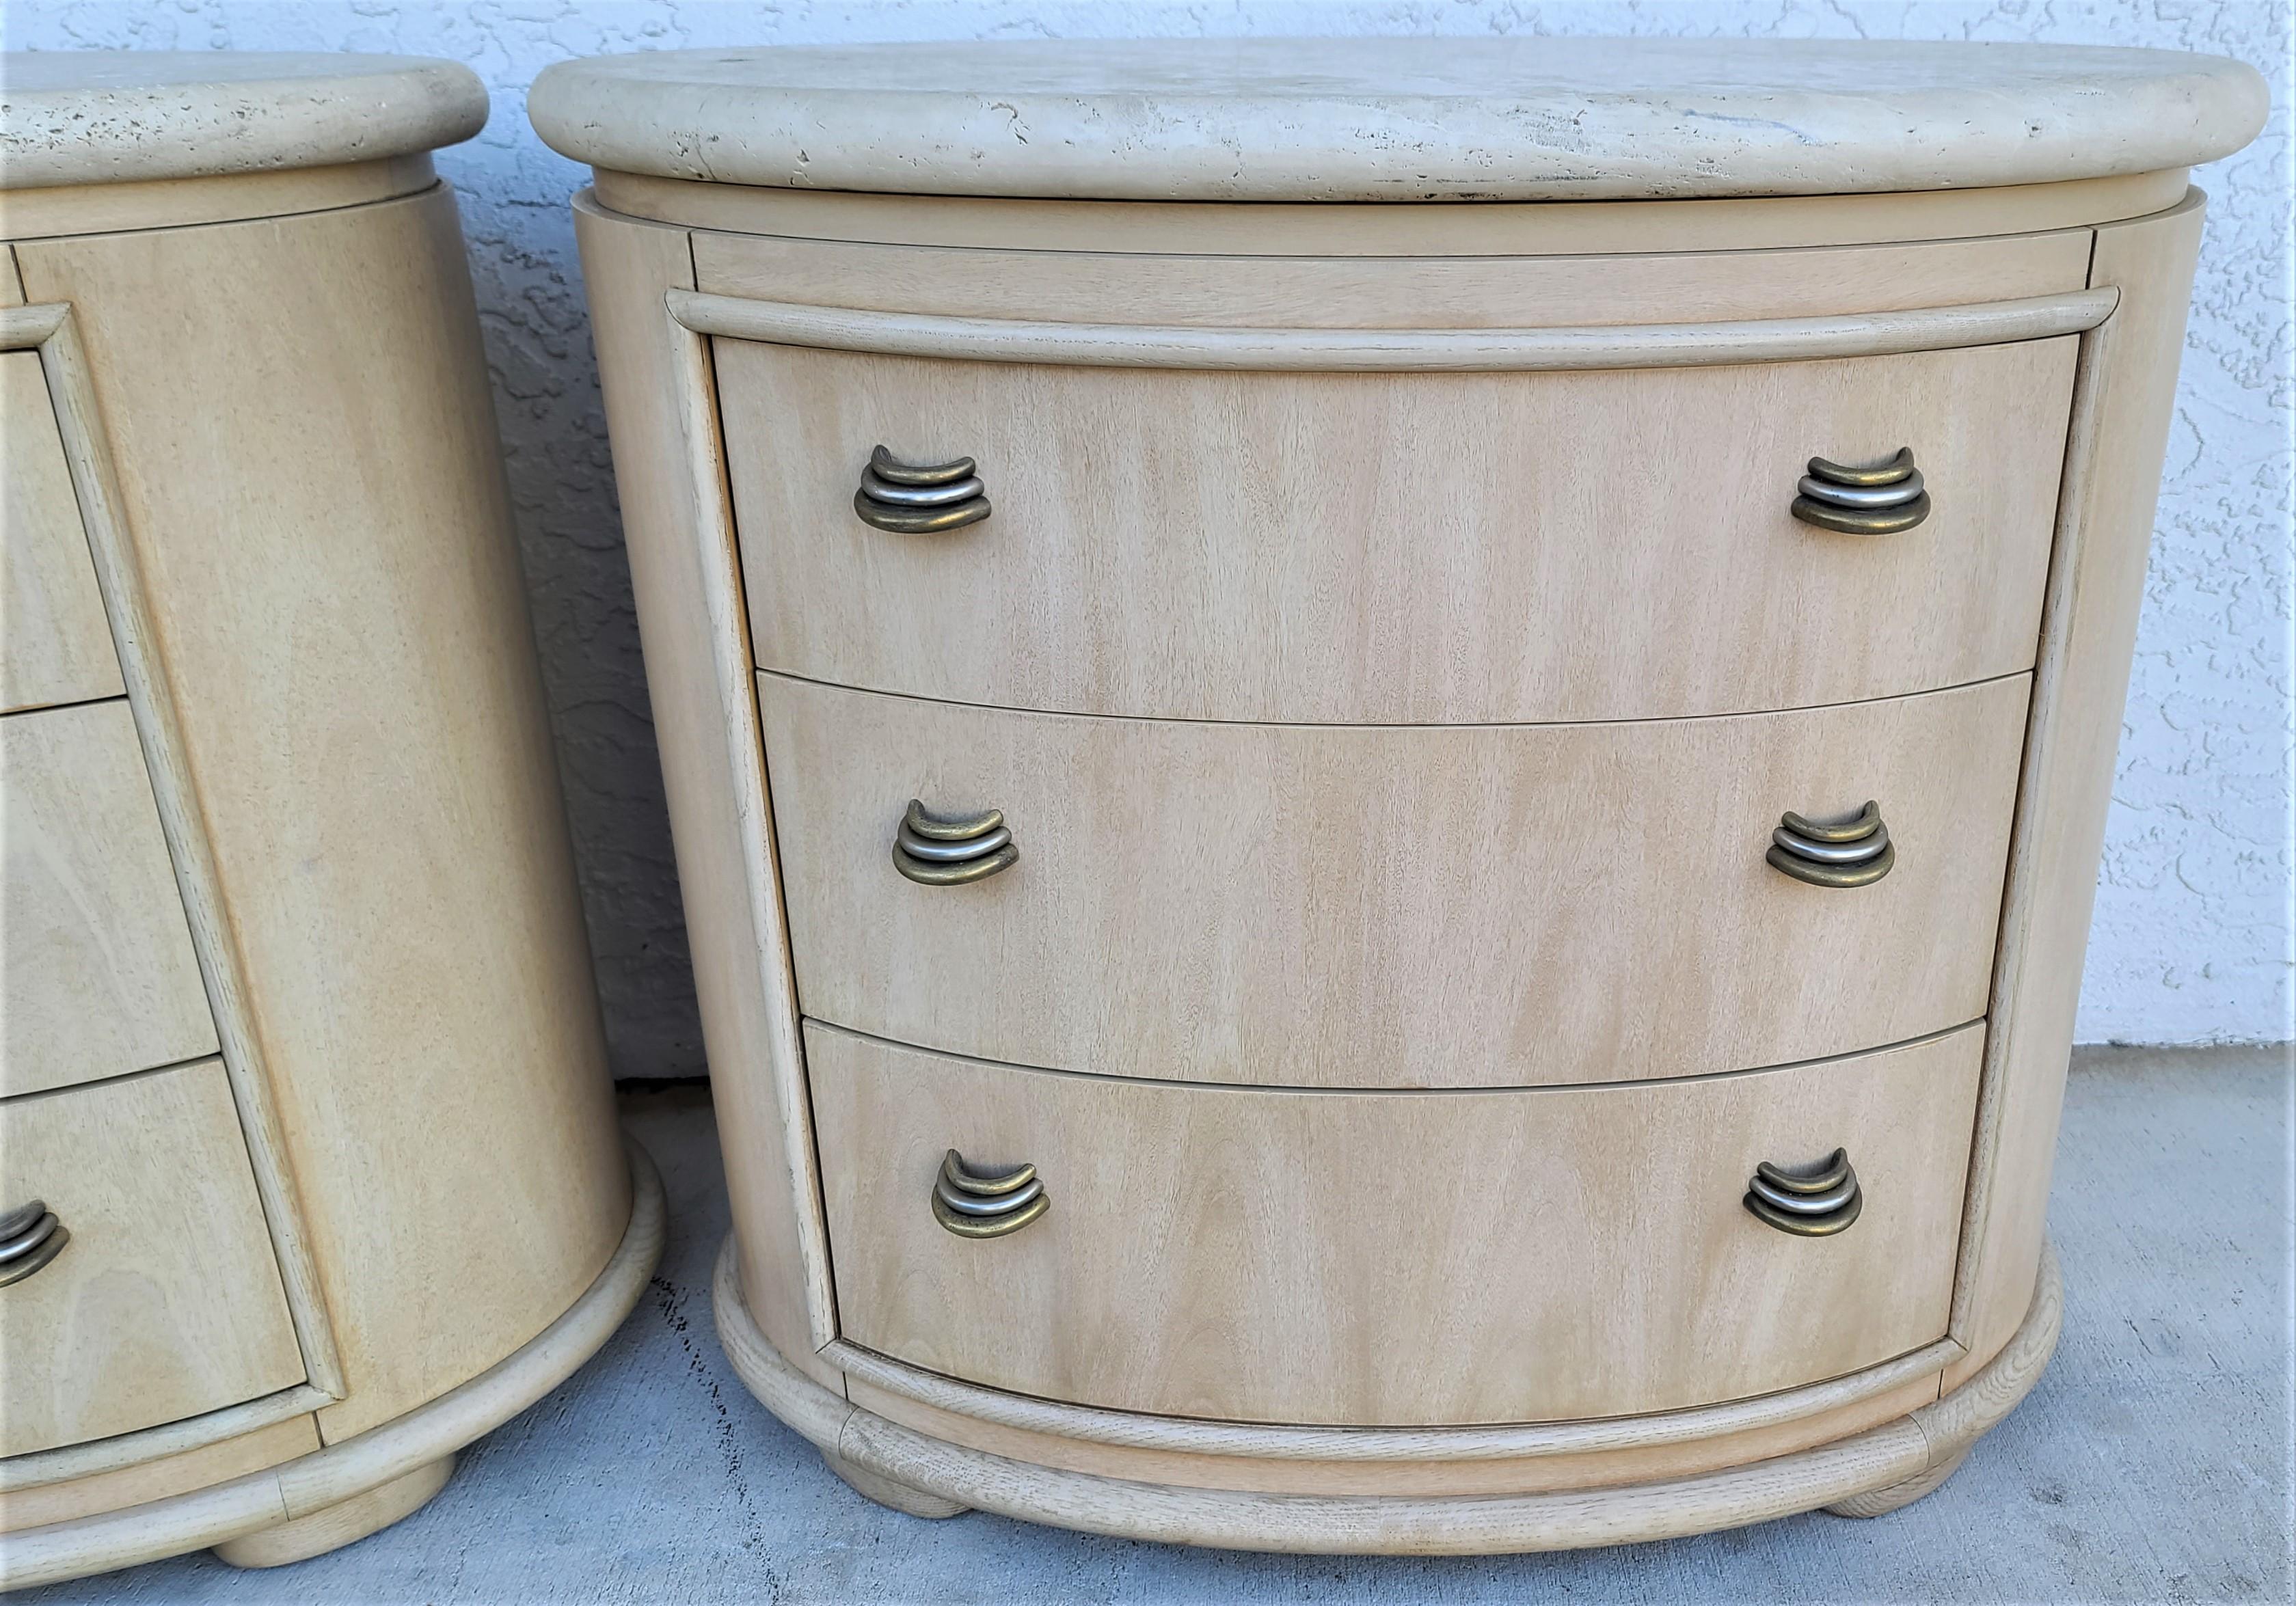 Offering one of our recent Palm Beach estate fine furniture acquisitions of a
pair of Henredon contemporary pickled wood king size stone top nightstands tables

Approximate Measurements in Inches
31